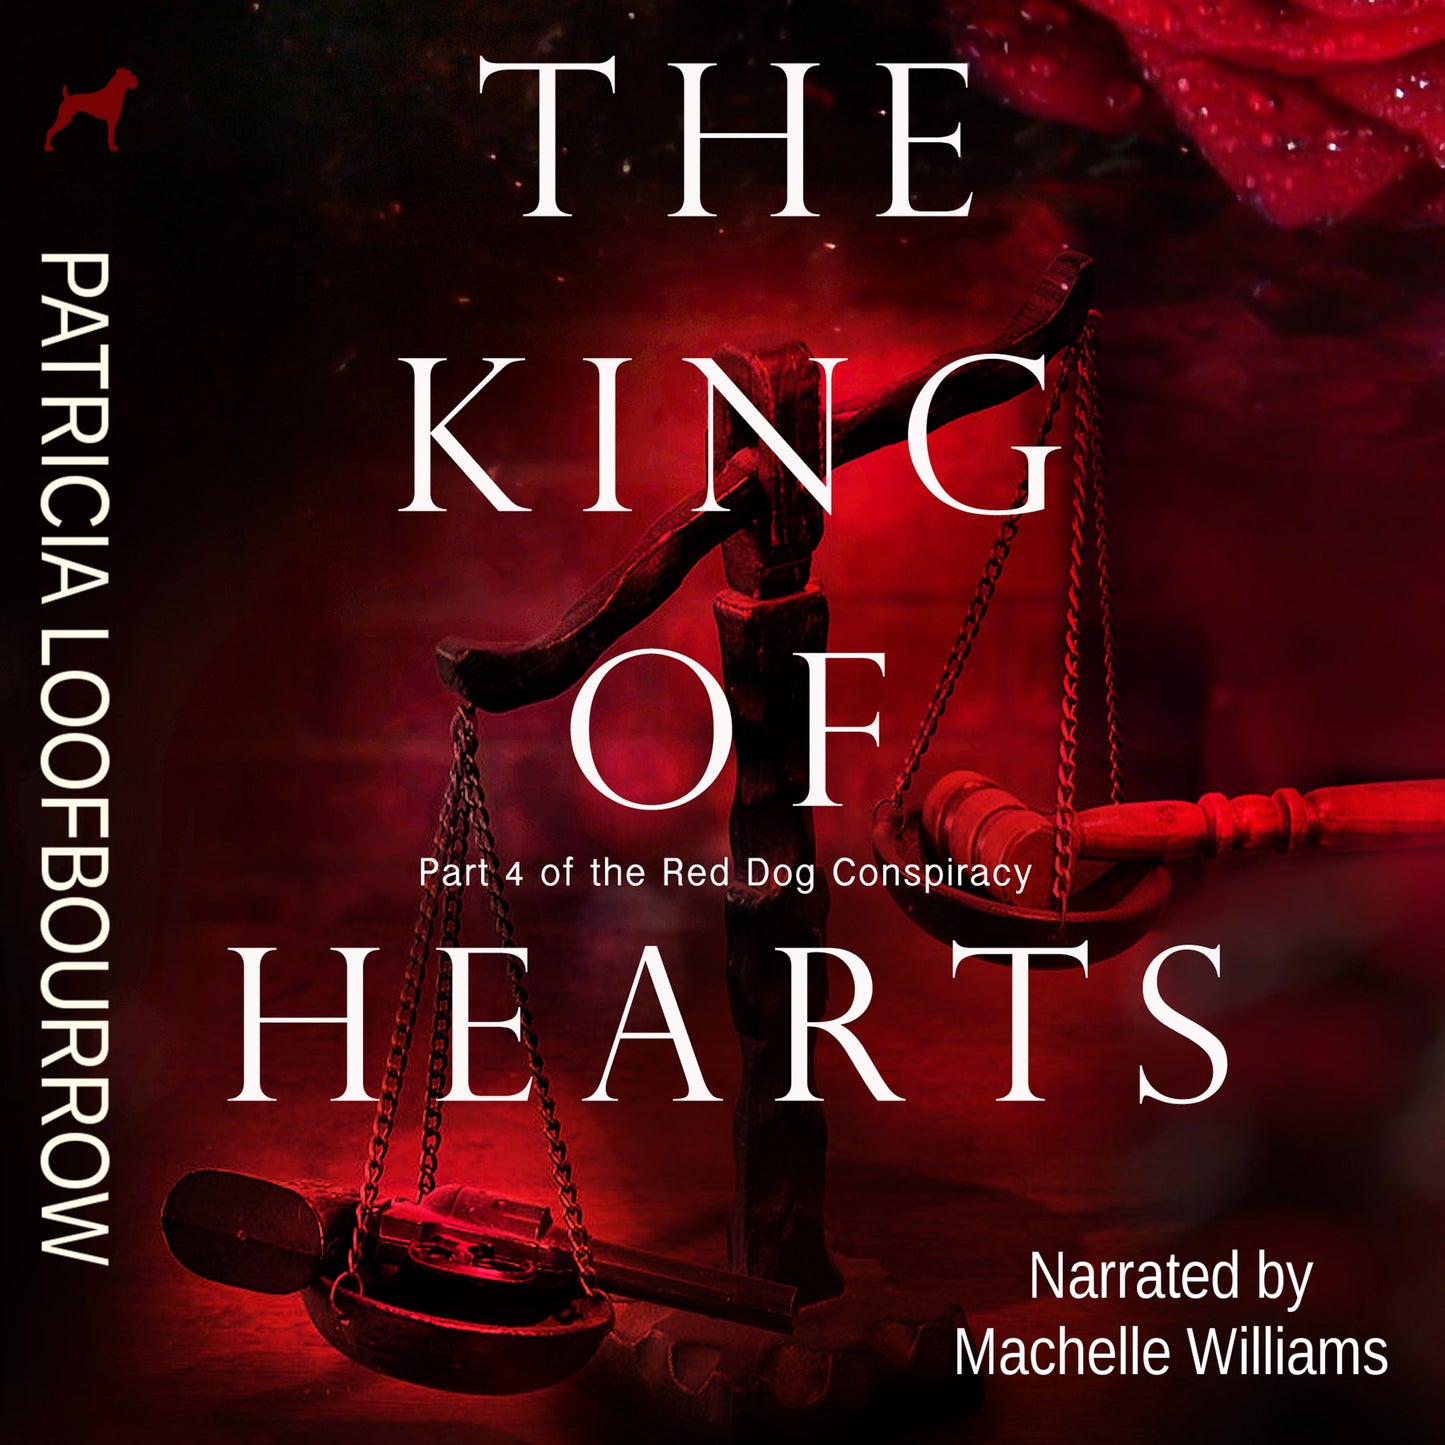 The King of Hearts (audiobook) - PatriciaLoofbourrow